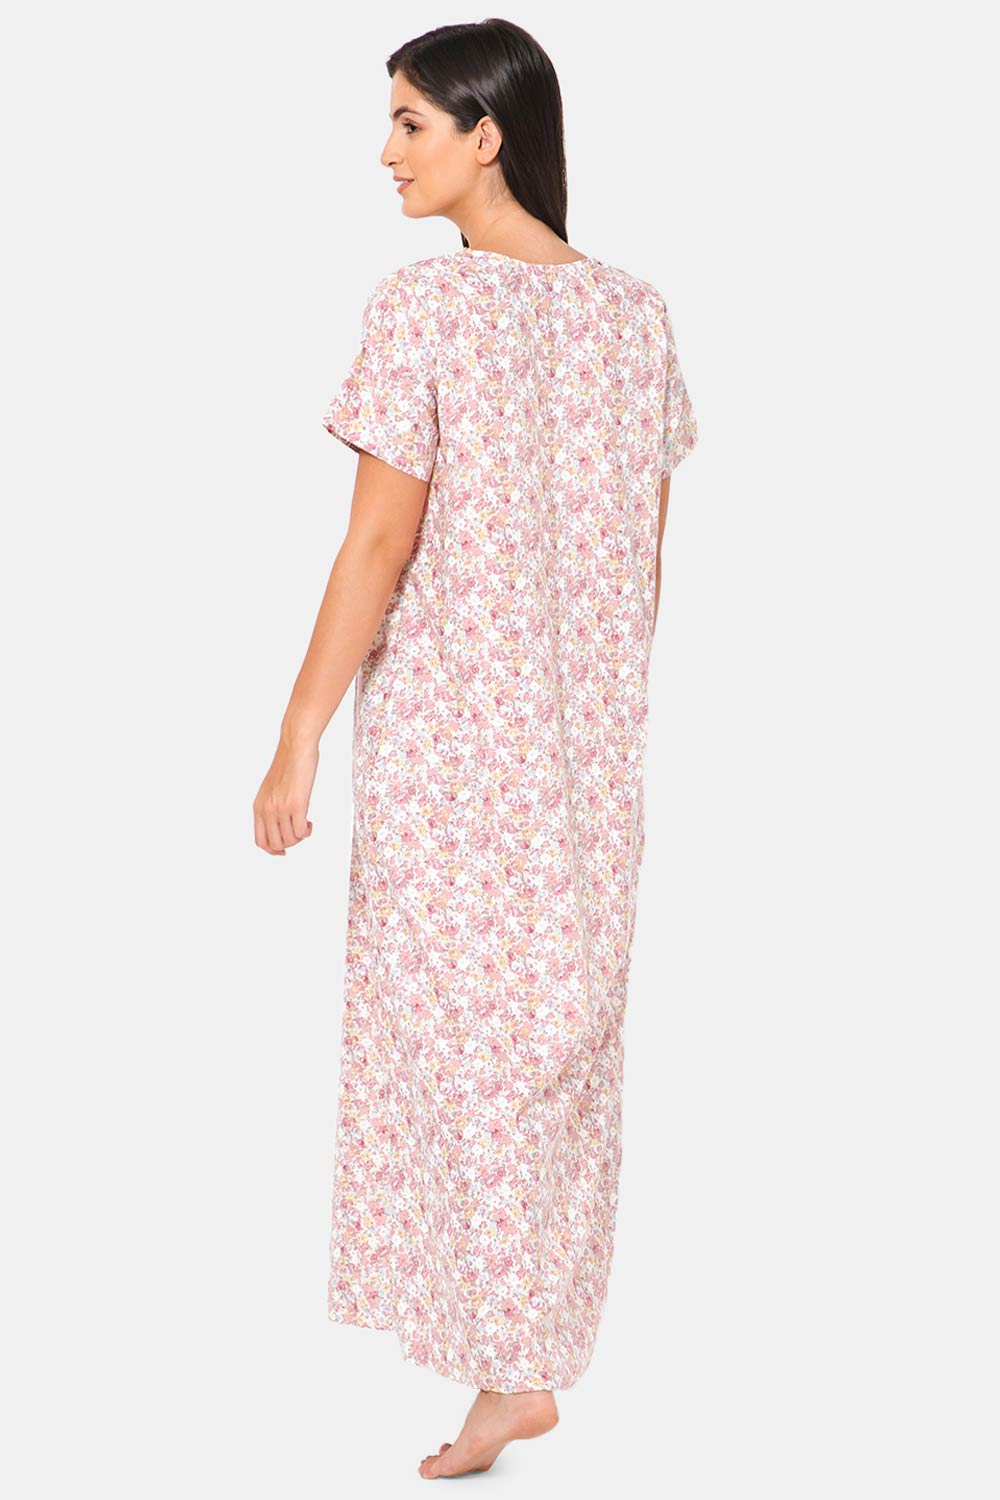 Naidu Hall V-Neck Short Sleeve Nighty with Front Patch Pocket - NT19 - Pink